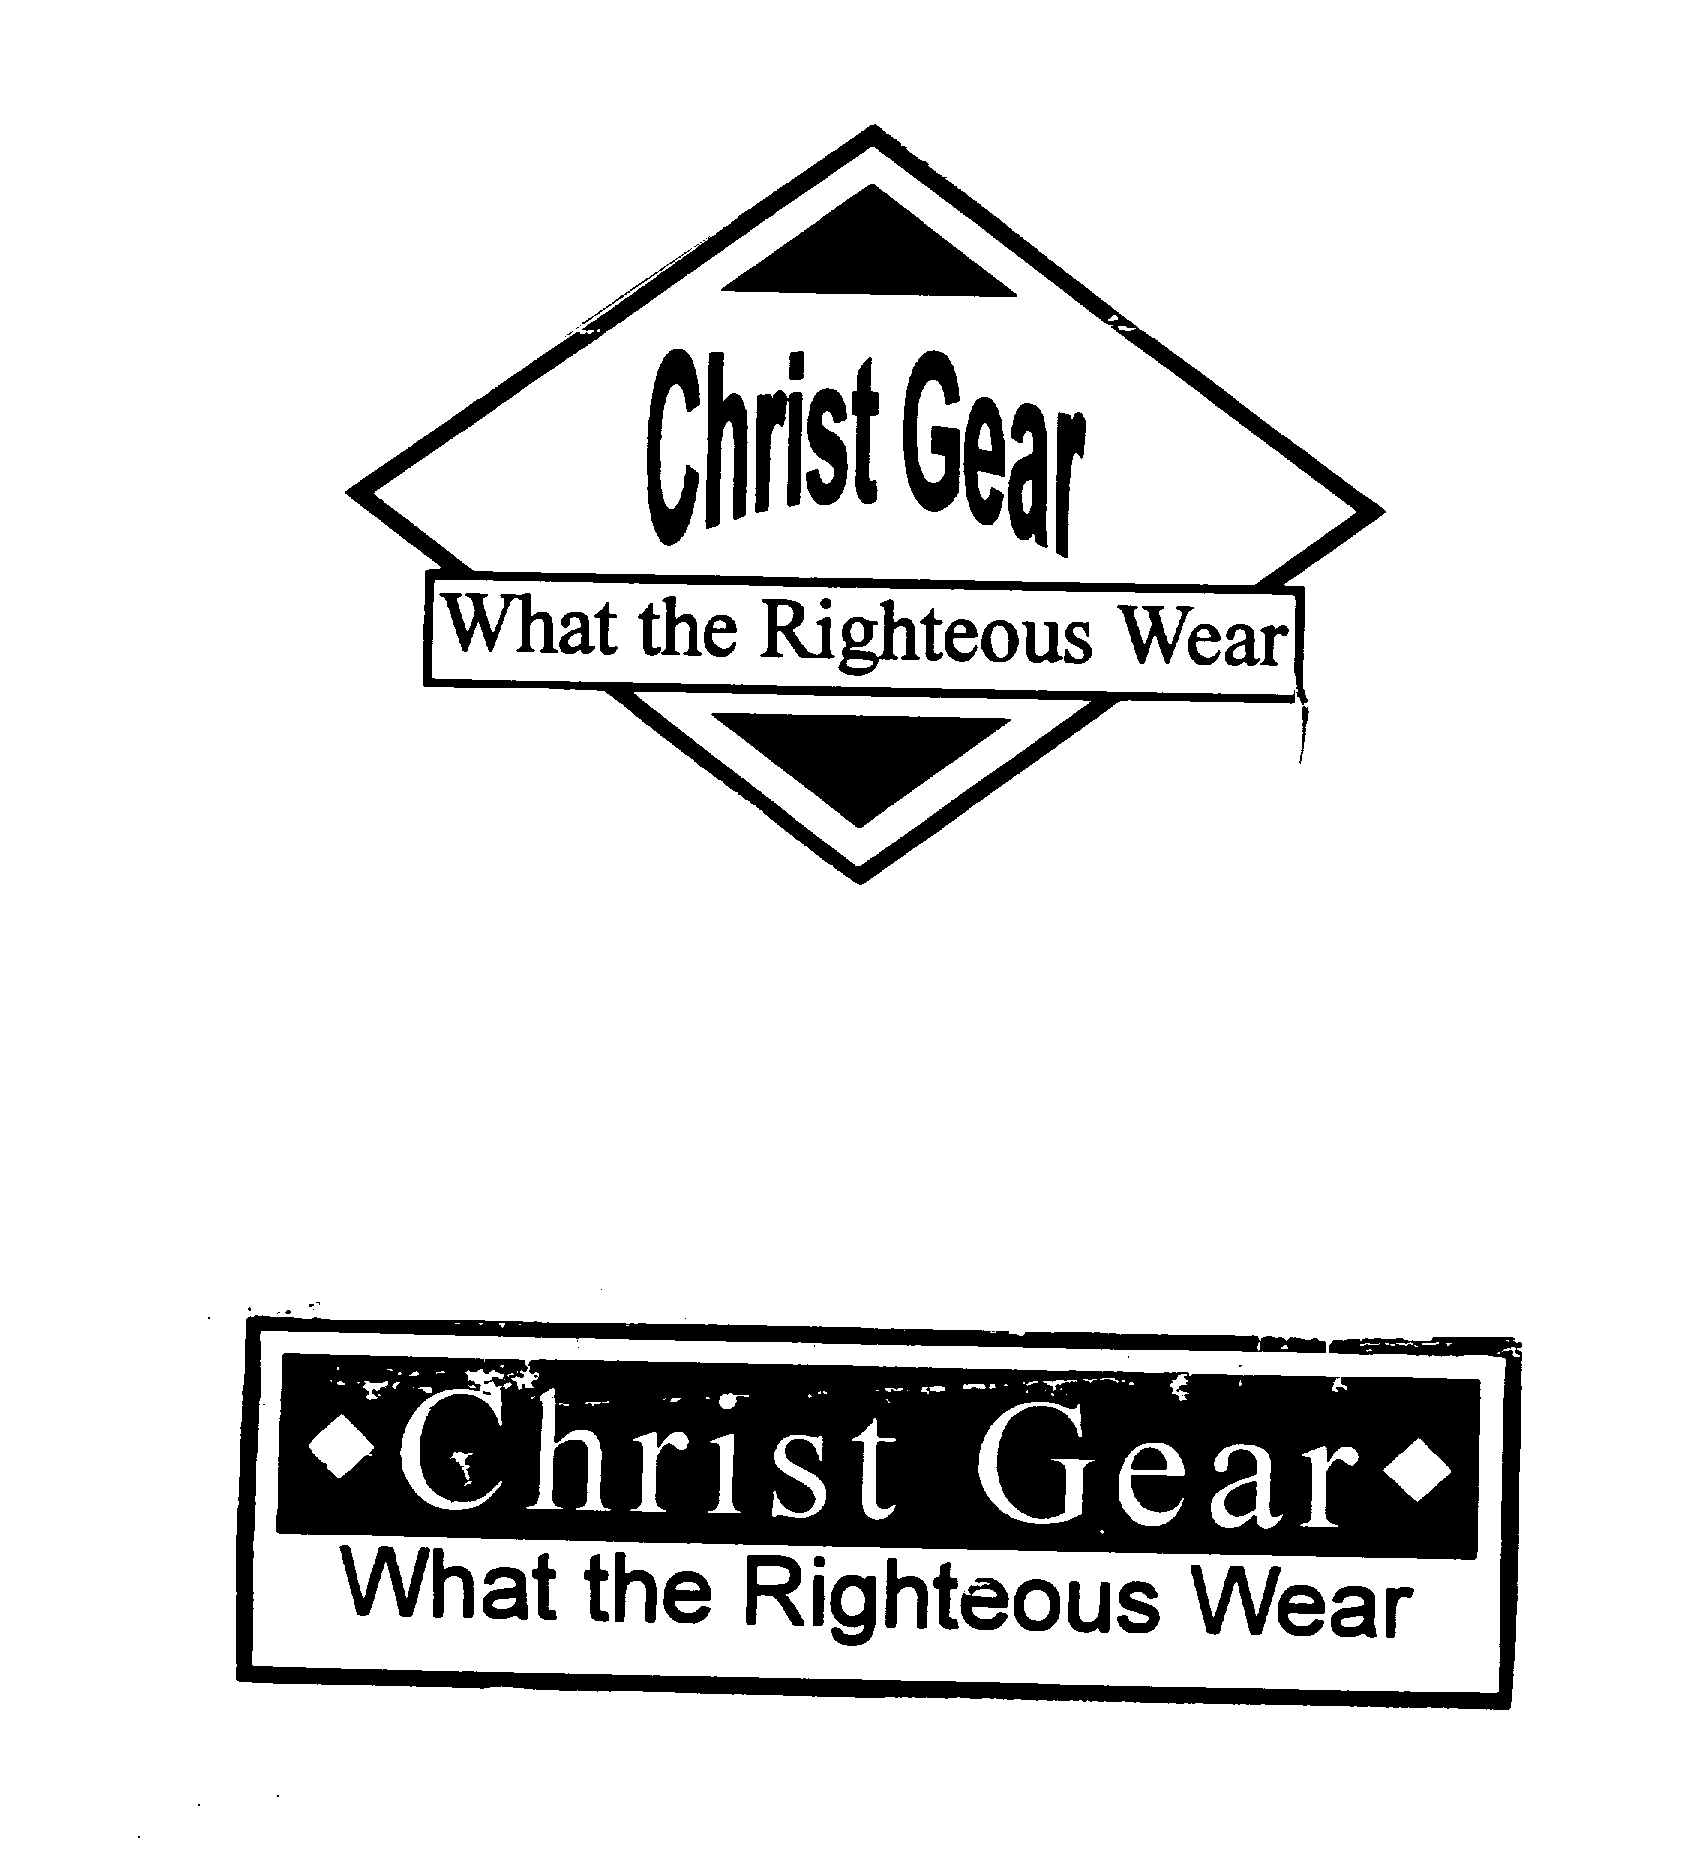  CHRIST GEAR WHAT THE RIGHTEOUS WEAR